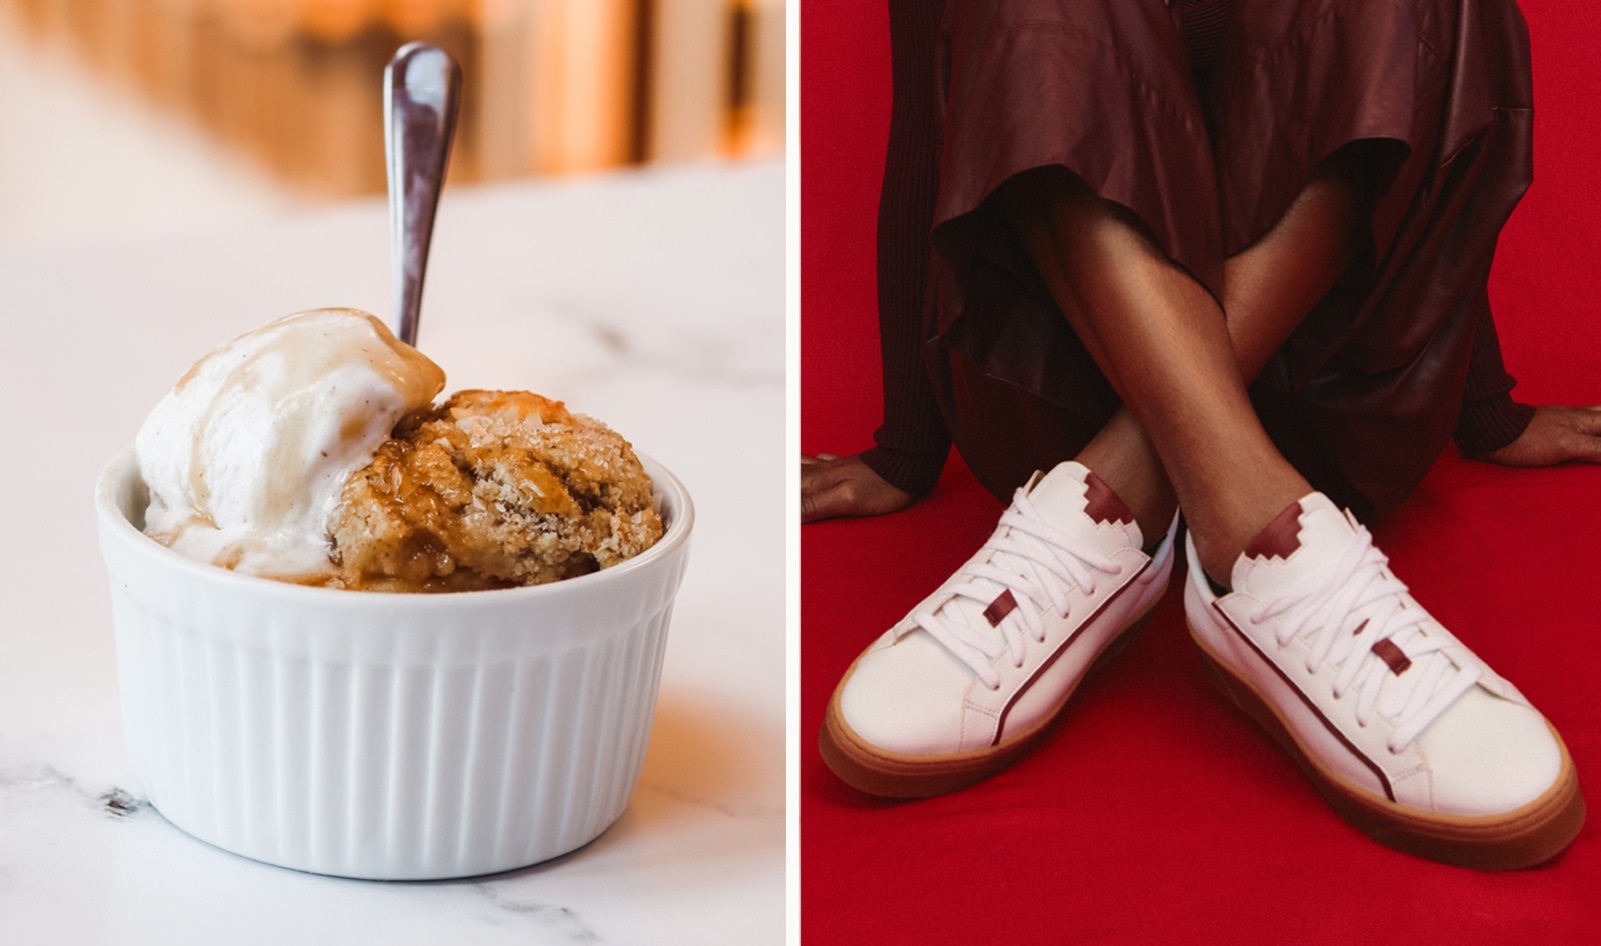 These New Vegan Leather Shoes and Fruity Cobbler Are Made From the Same Things